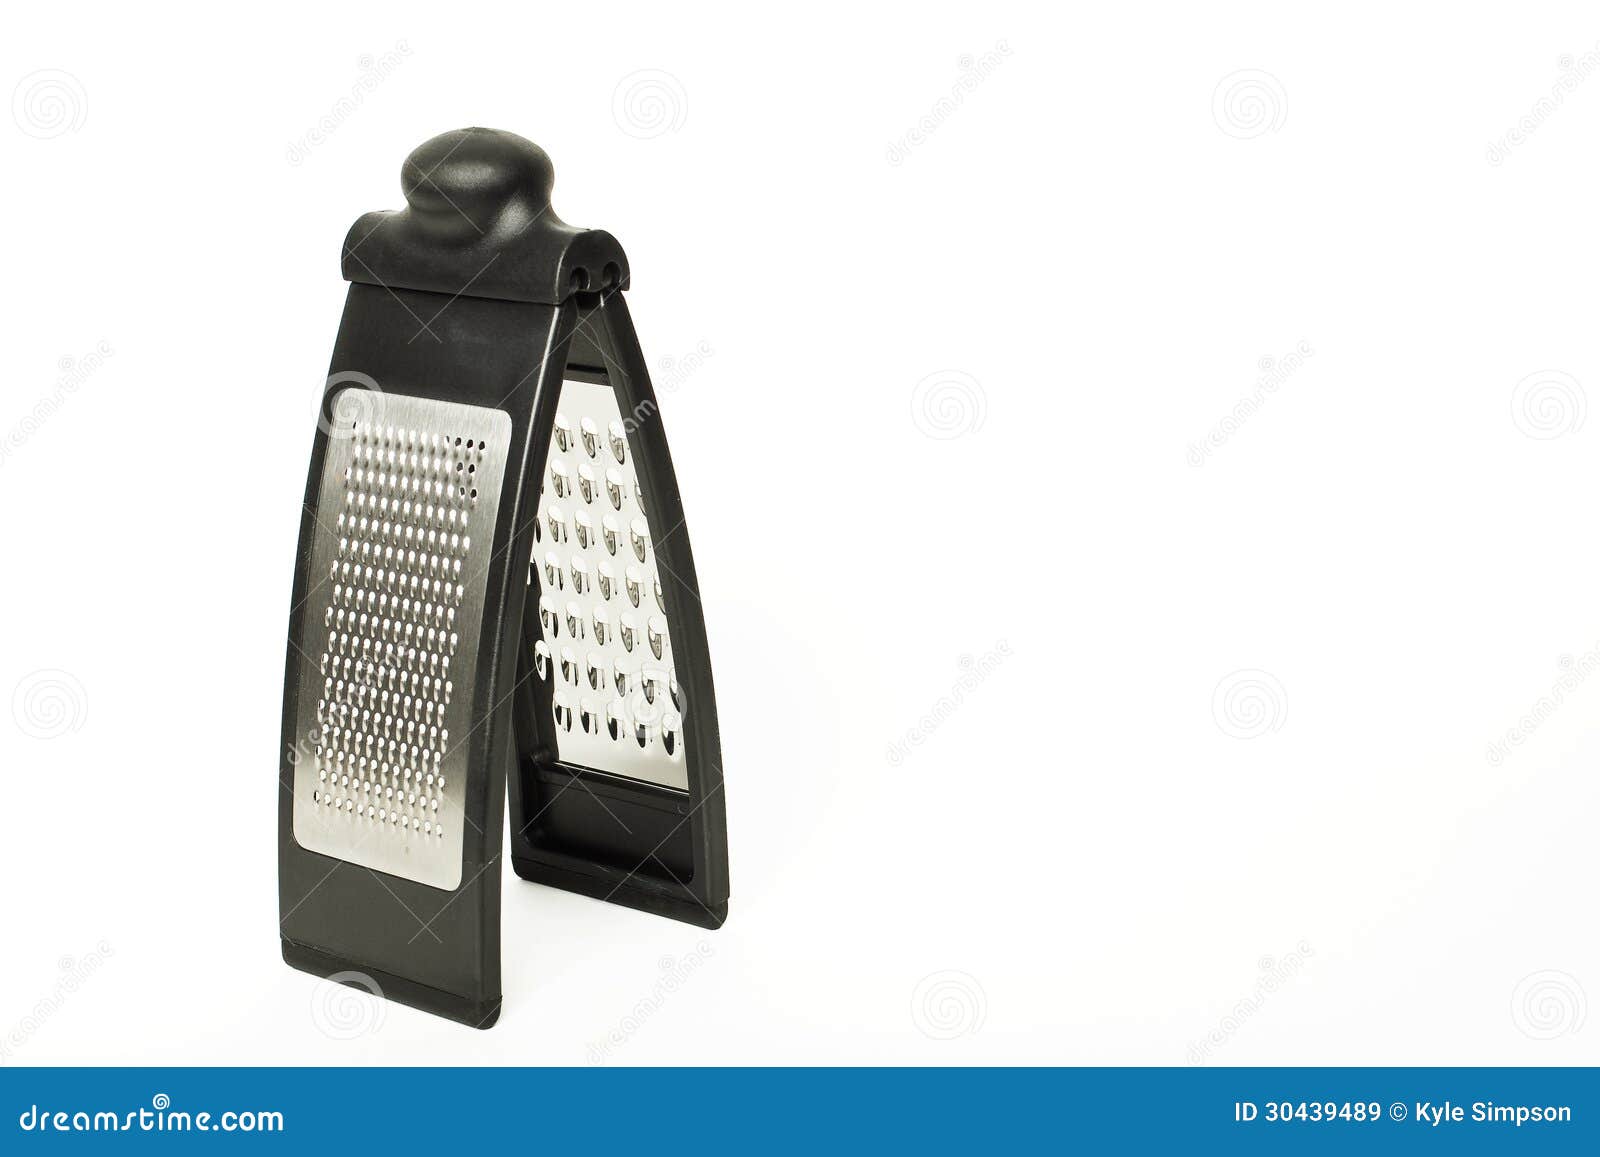 https://thumbs.dreamstime.com/z/cheese-grater-folding-standing-white-background-30439489.jpg